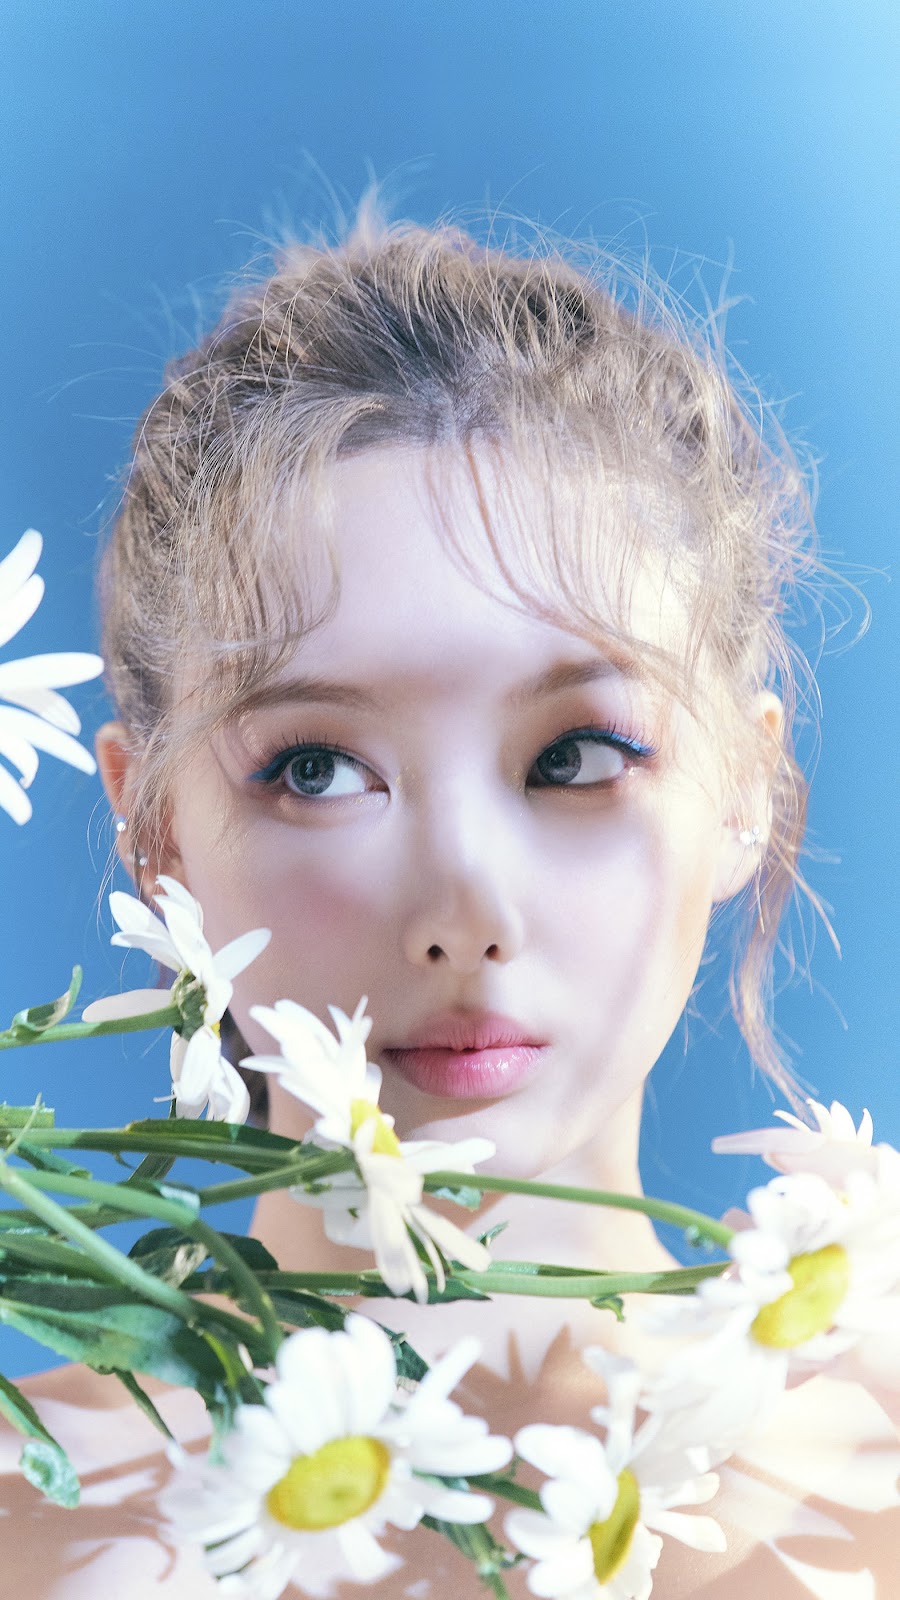 TWICE Nayeon photo shoot archive on Solo Debut 2022 4